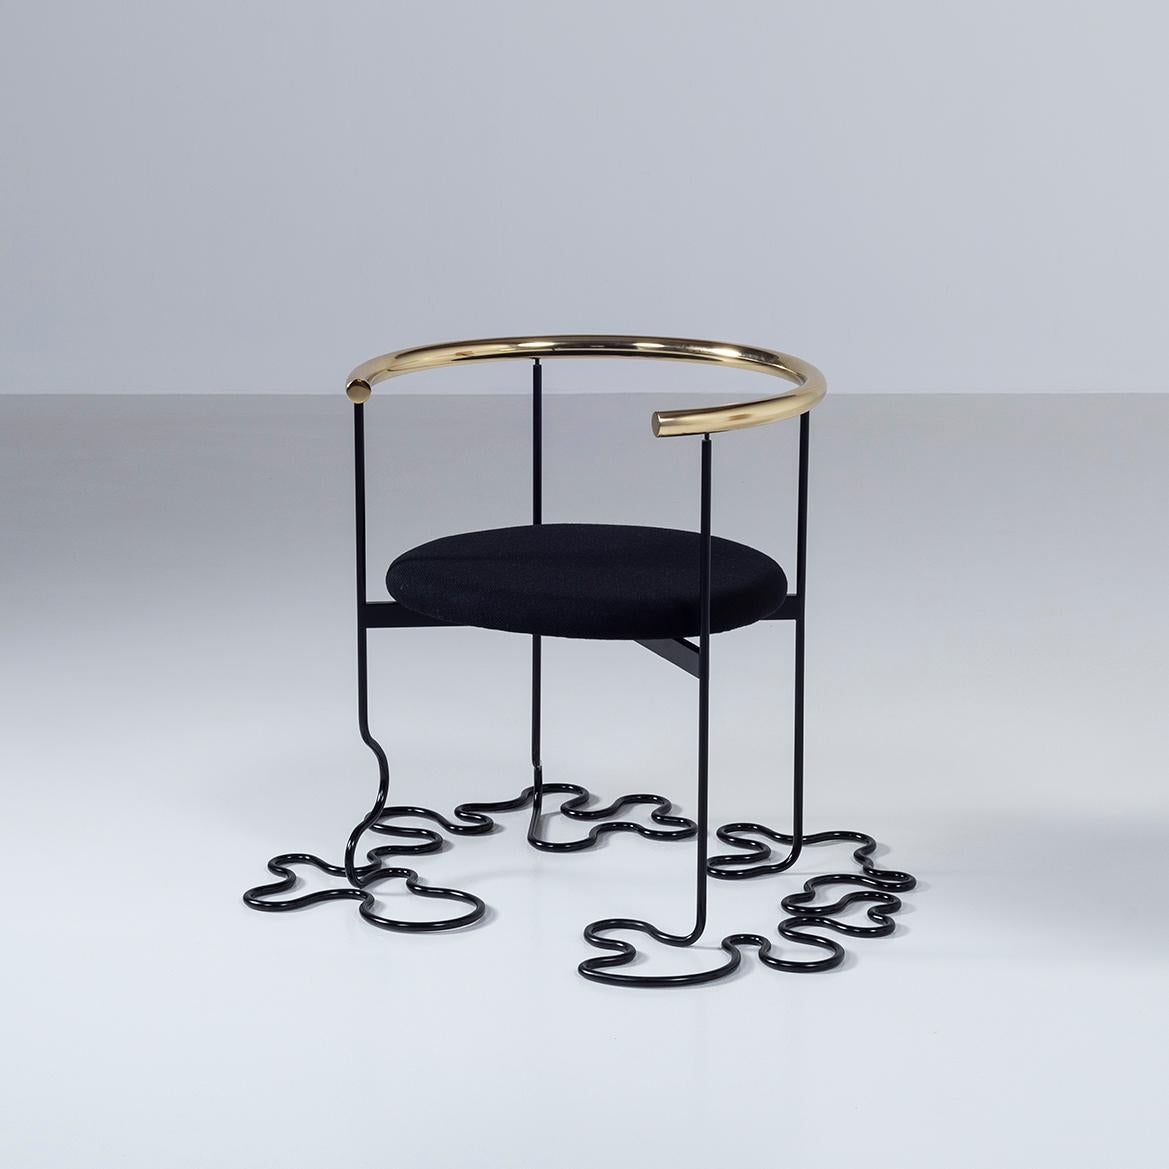 One of the shapes that the black pipe chairs designed by Uchida have reached while evolving and being transformed by the momentum of the 1980s. 

Frame: steel melamine baking black finish
Arm: gold plated
Seat: upholstering.